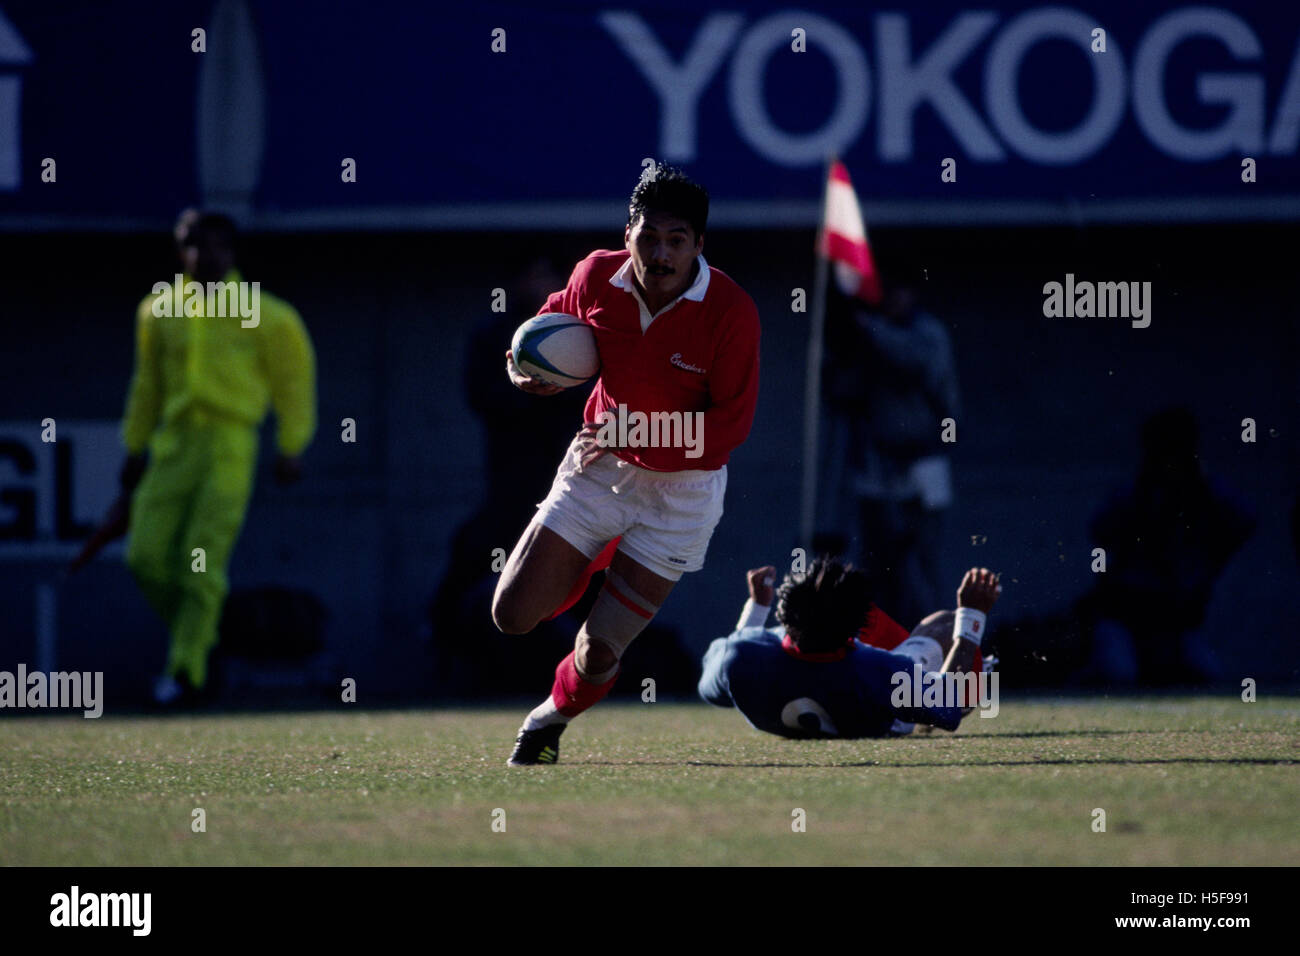 FILE : Japanese rugby legend Seiji Hirao died aged 53 on October 20, 2016. Hirao played in three World Cups for Japan and also coached in another. He was also a key figure in bringing the next Rugby World Cup to Japan in 2019. UNDATED PICTURE SHOWS : Seiji Hirao of Kobe Steel in action during a match in Japan. © Akito Mizutani/AFLO/Alamy Live News Stock Photo